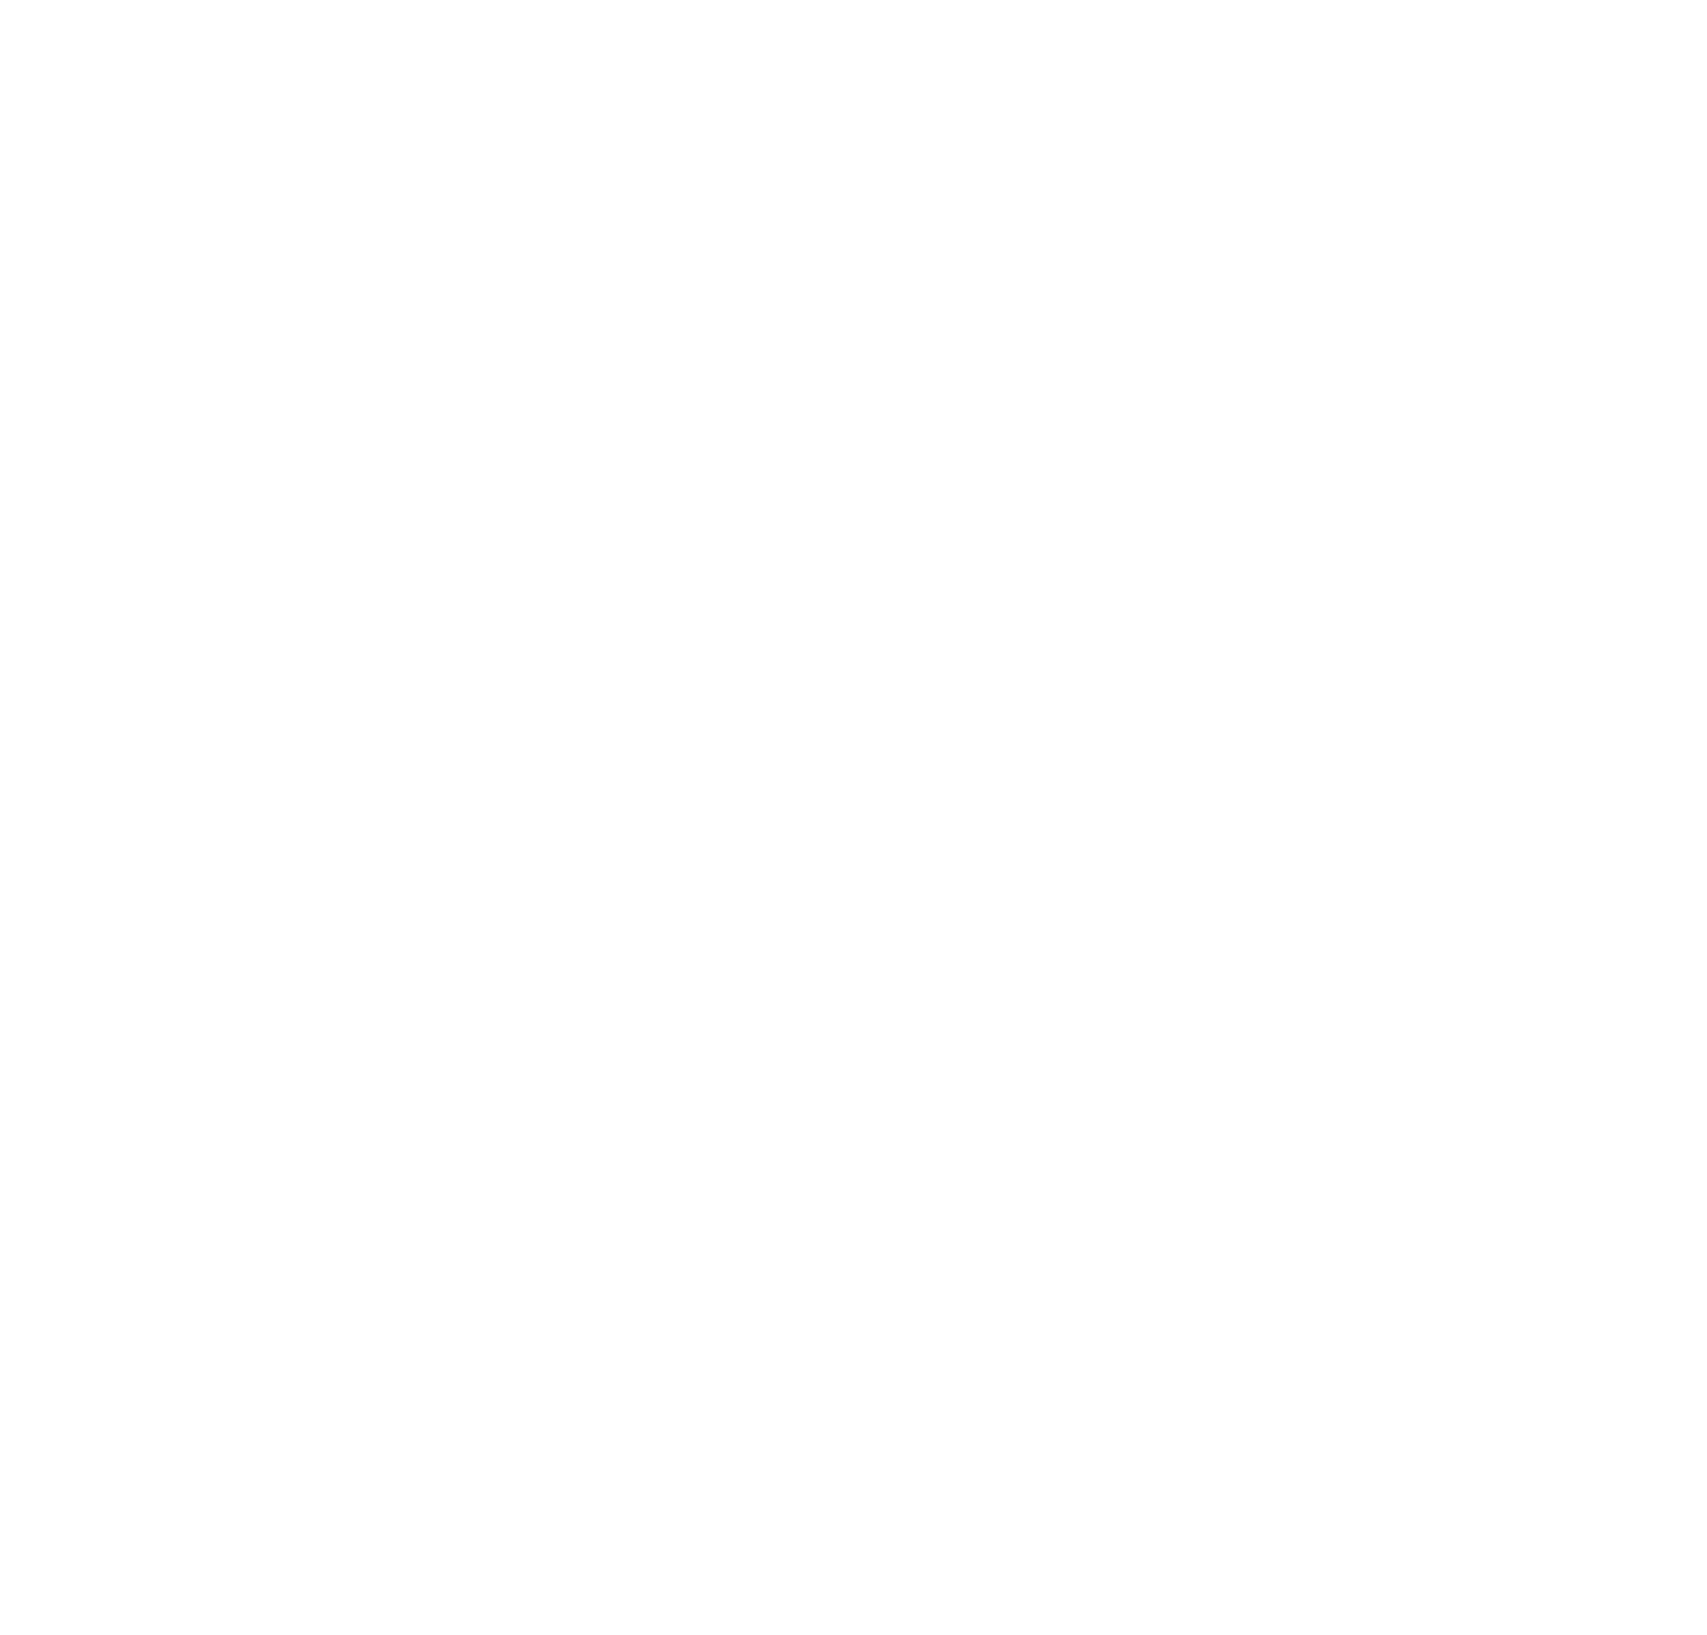 A BRIGH-TER FUTURE IS COMING!